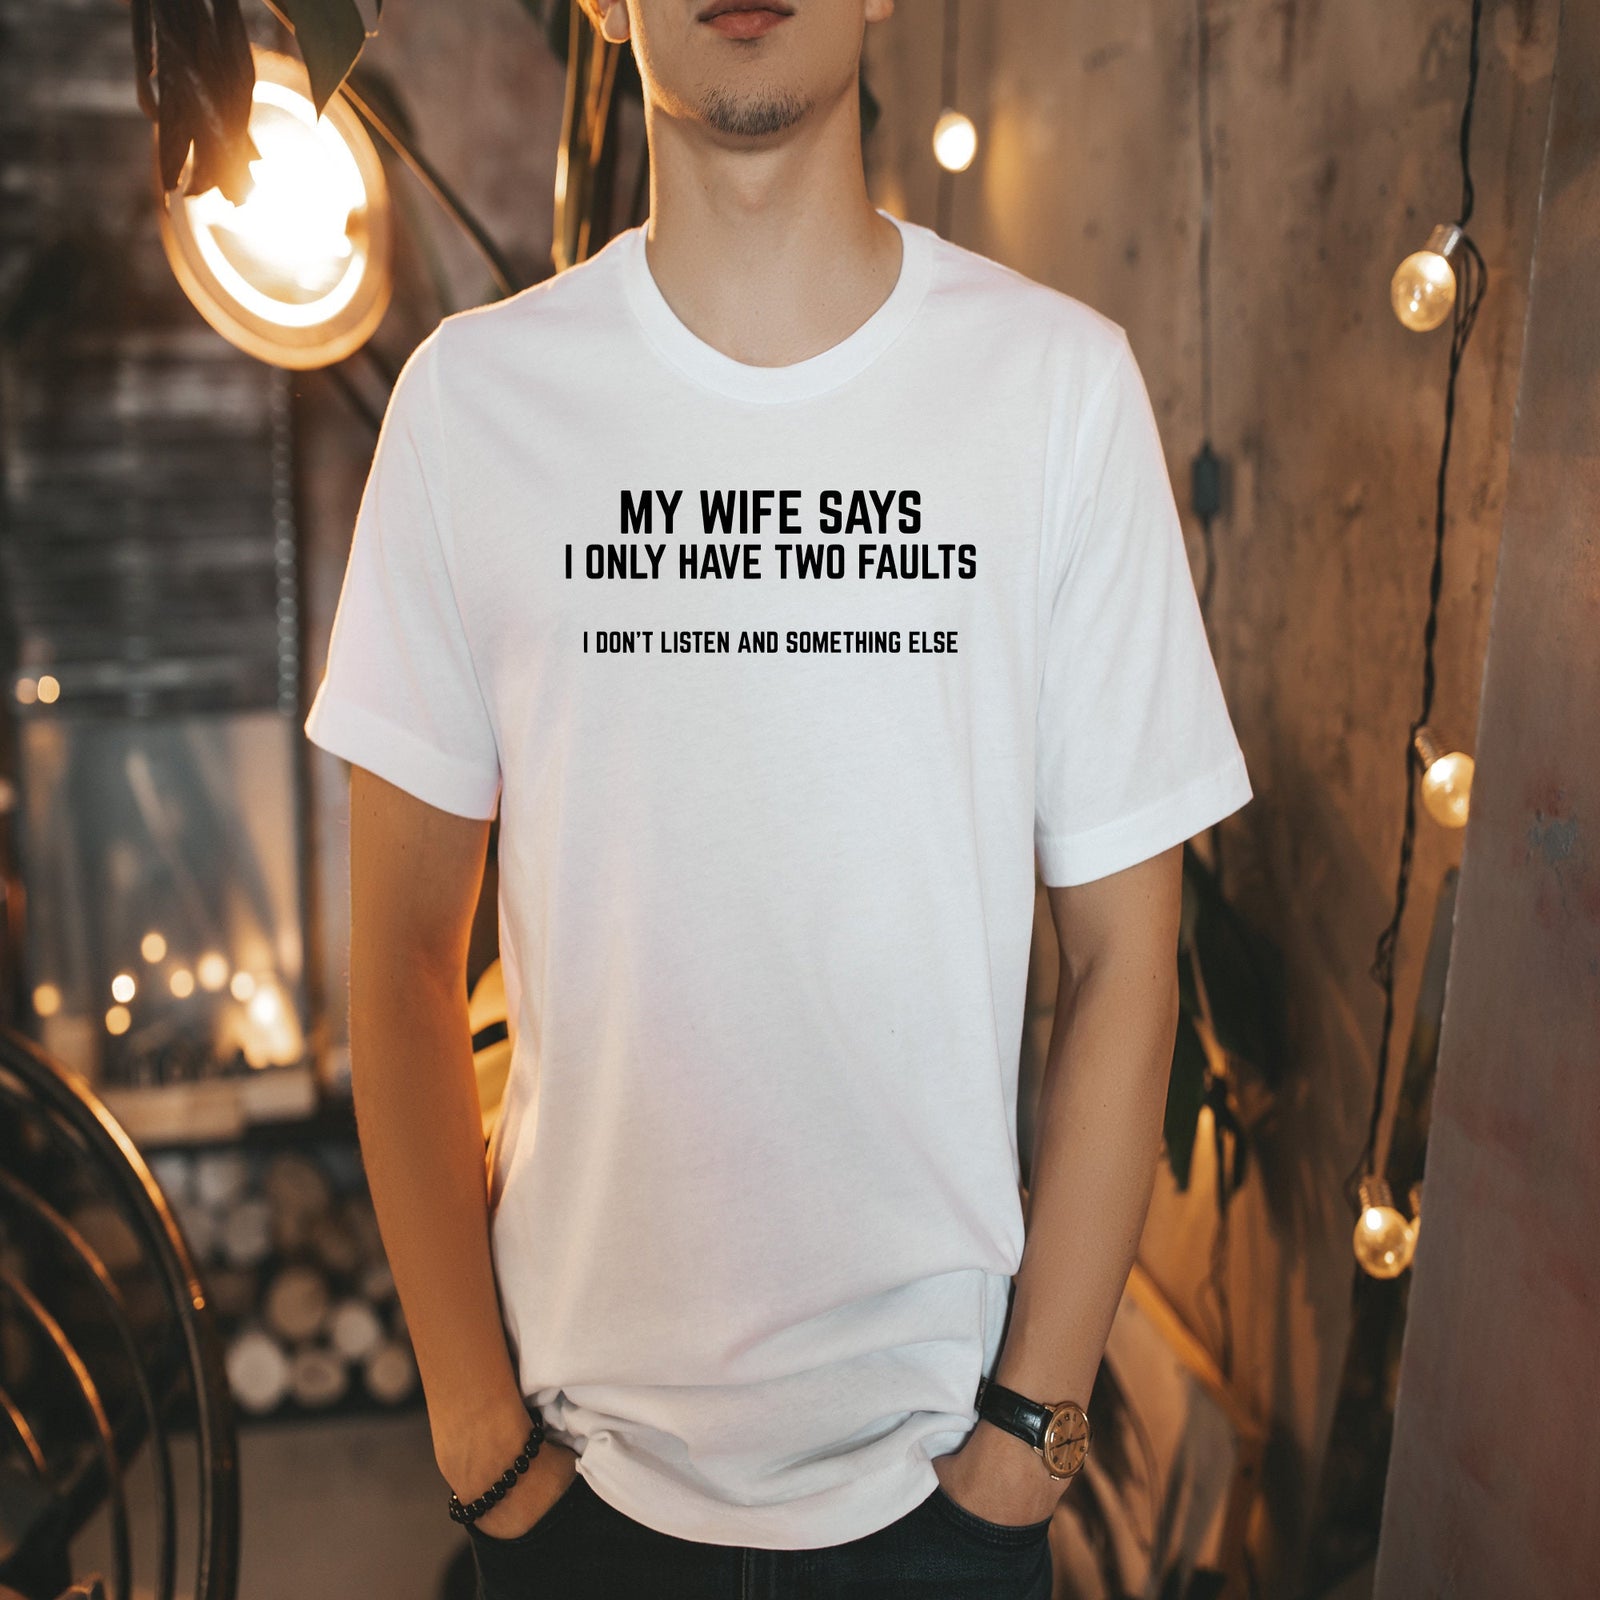 My Wife Says I Only Have Two Faults T Shirt- Funny Husband T-shirt - Gift for Husband - Husband Statement Shirt - Husband Humor Shirt